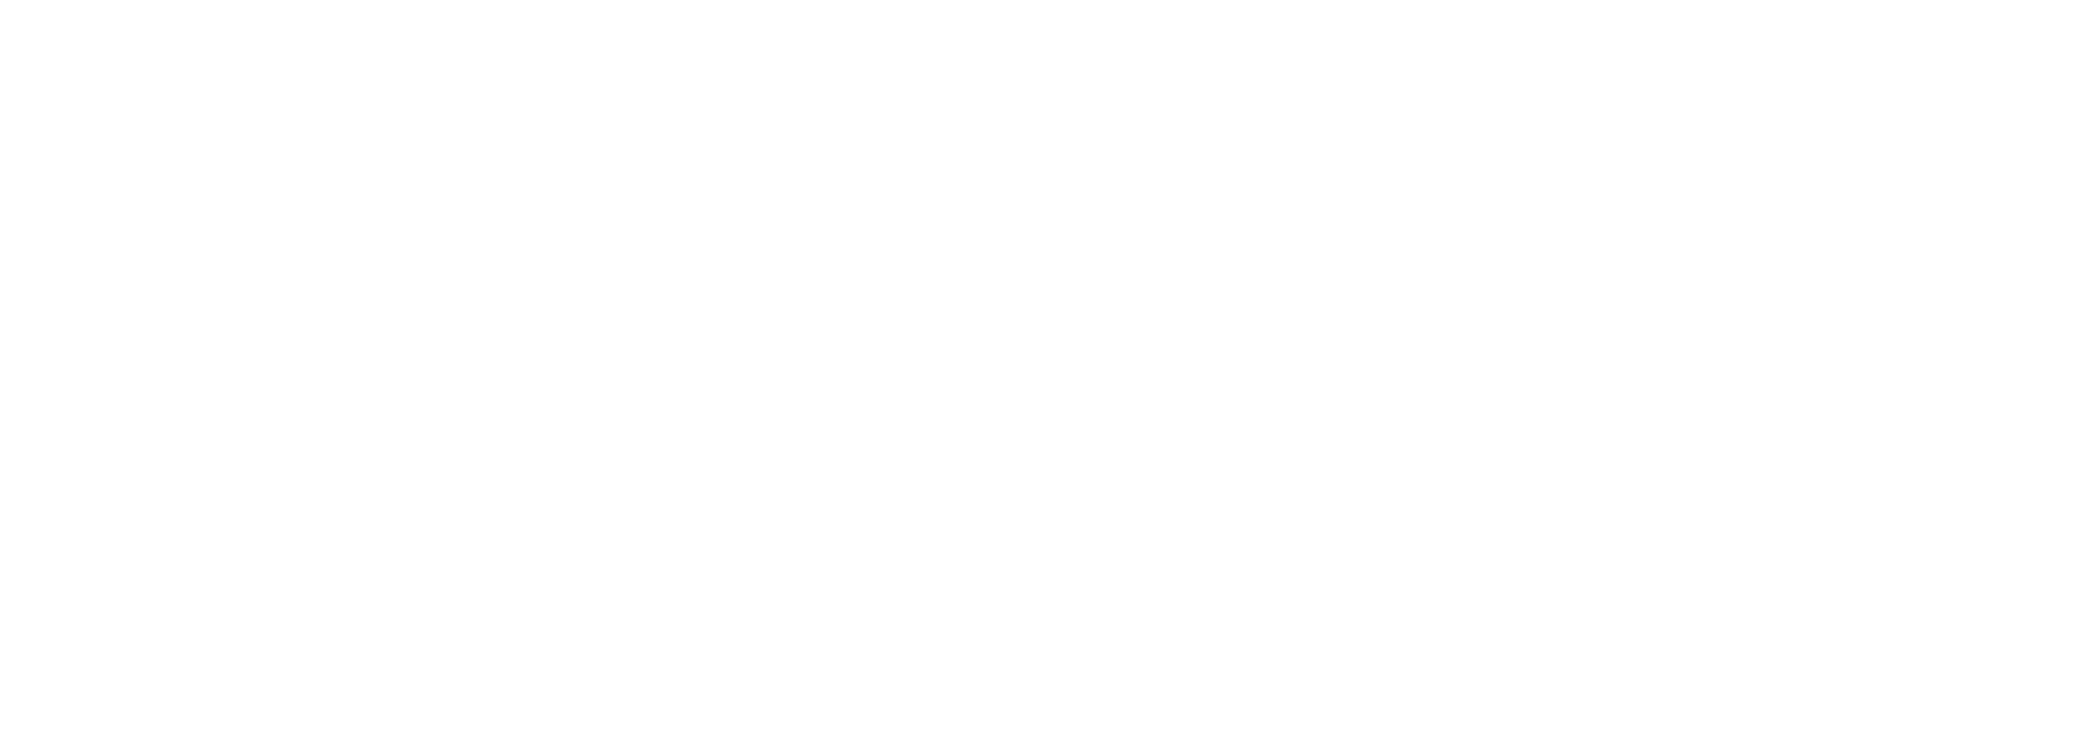 Made Possible with Heritage Fund